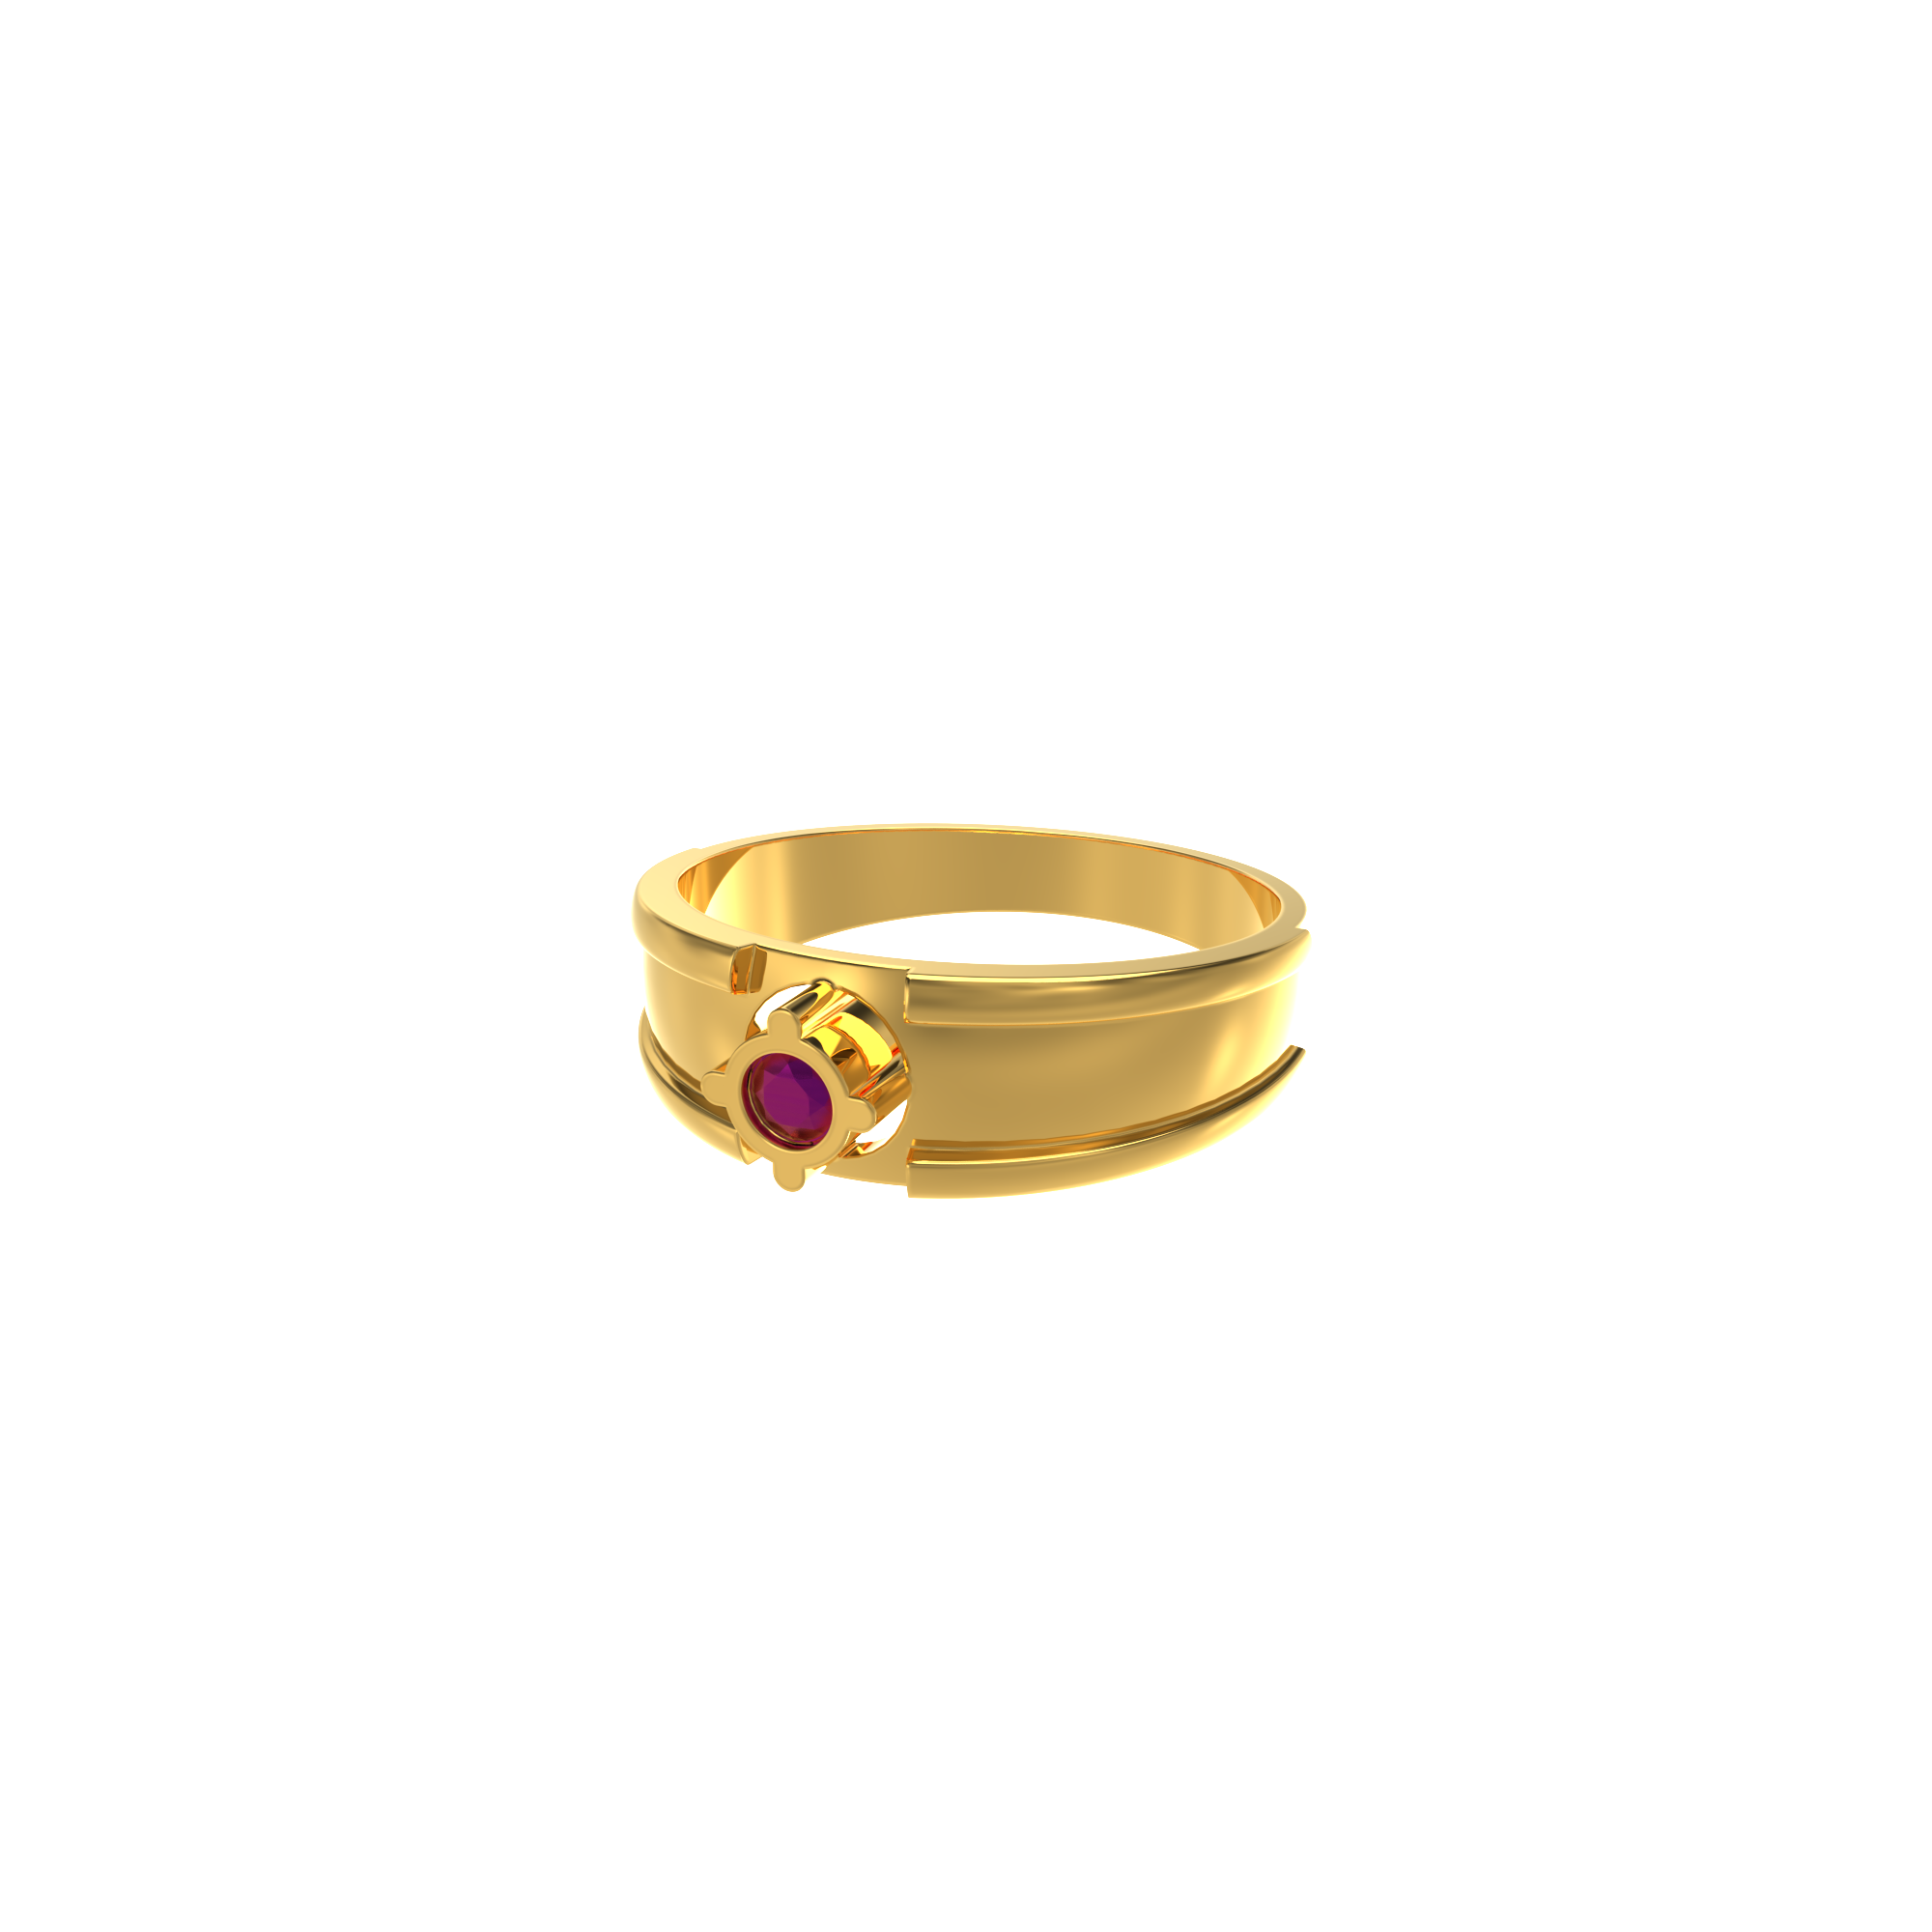 Customized-gold-jewellery-manufacturer-in-Chennai